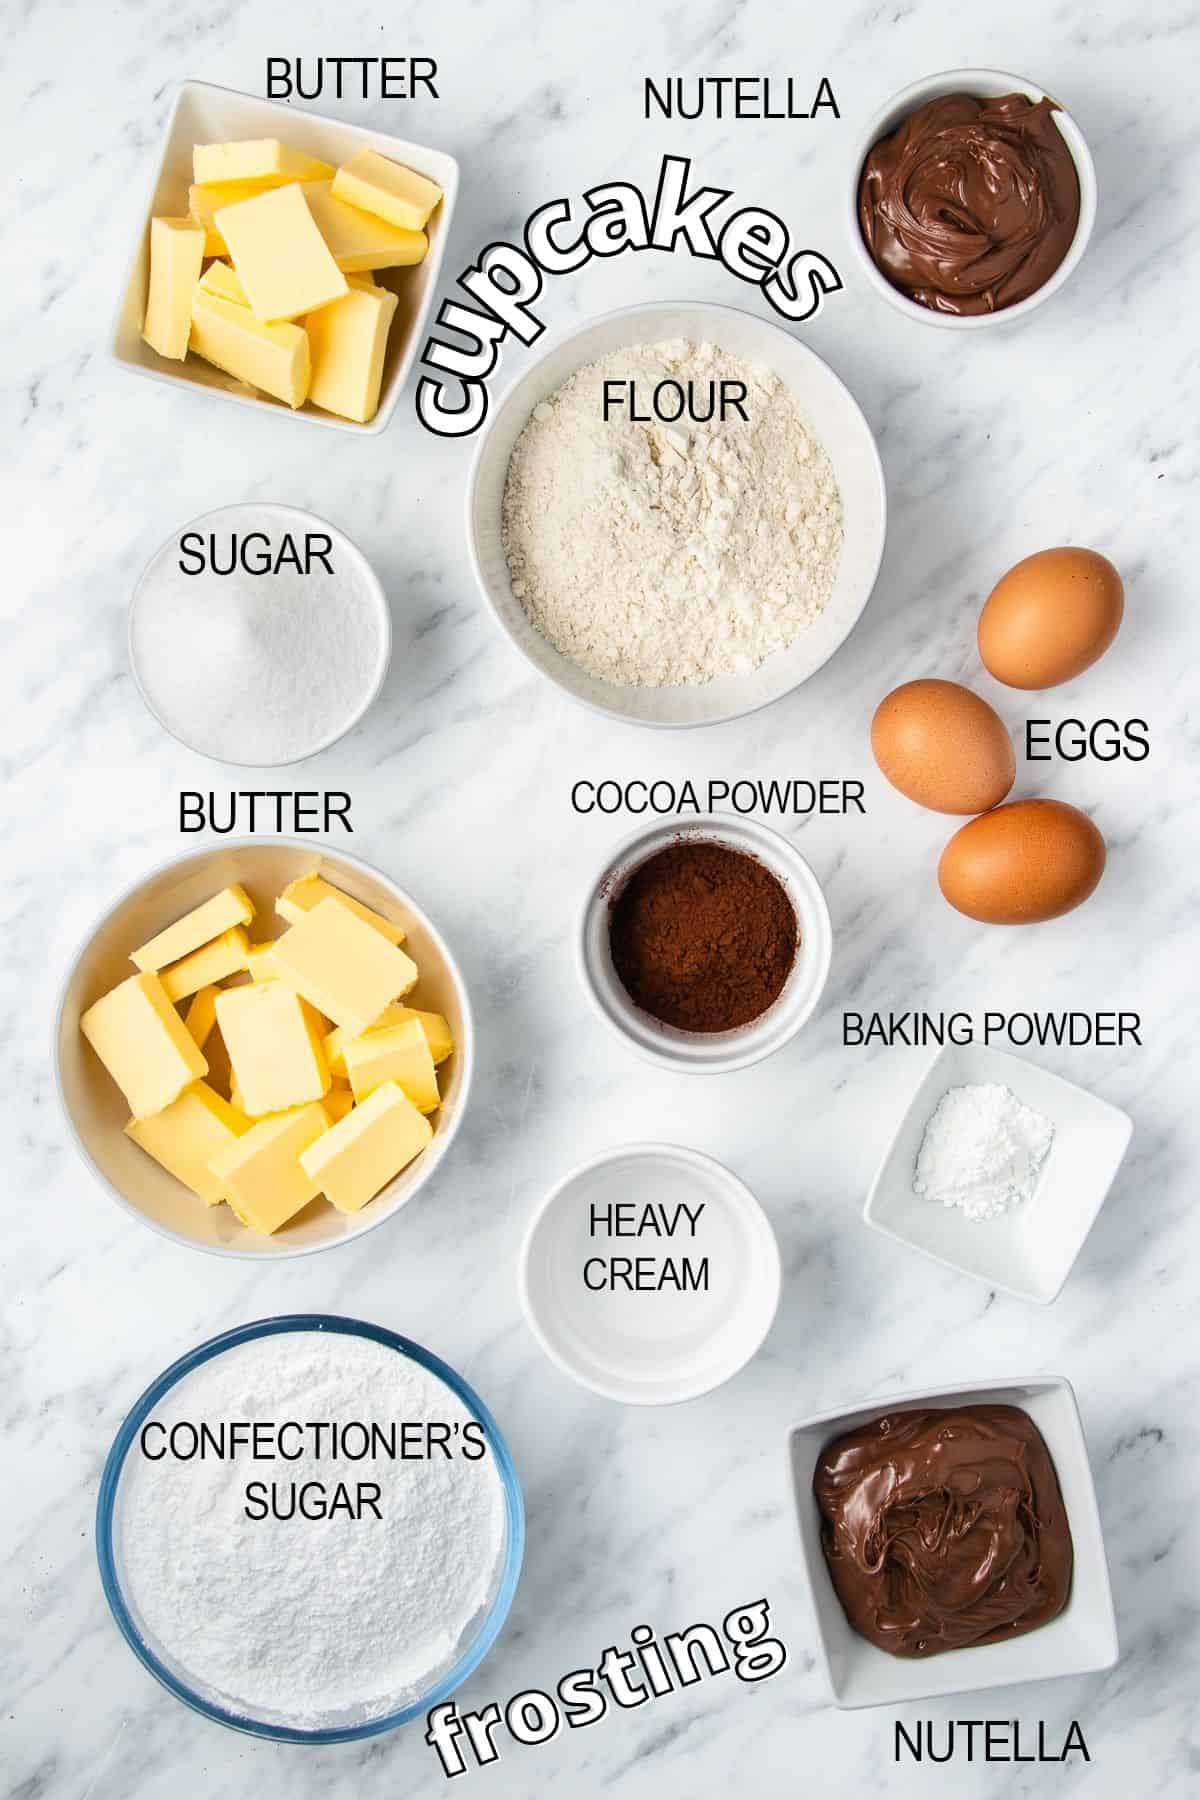 Ingredients needed for Nutella cupcakes and Nutella frosting